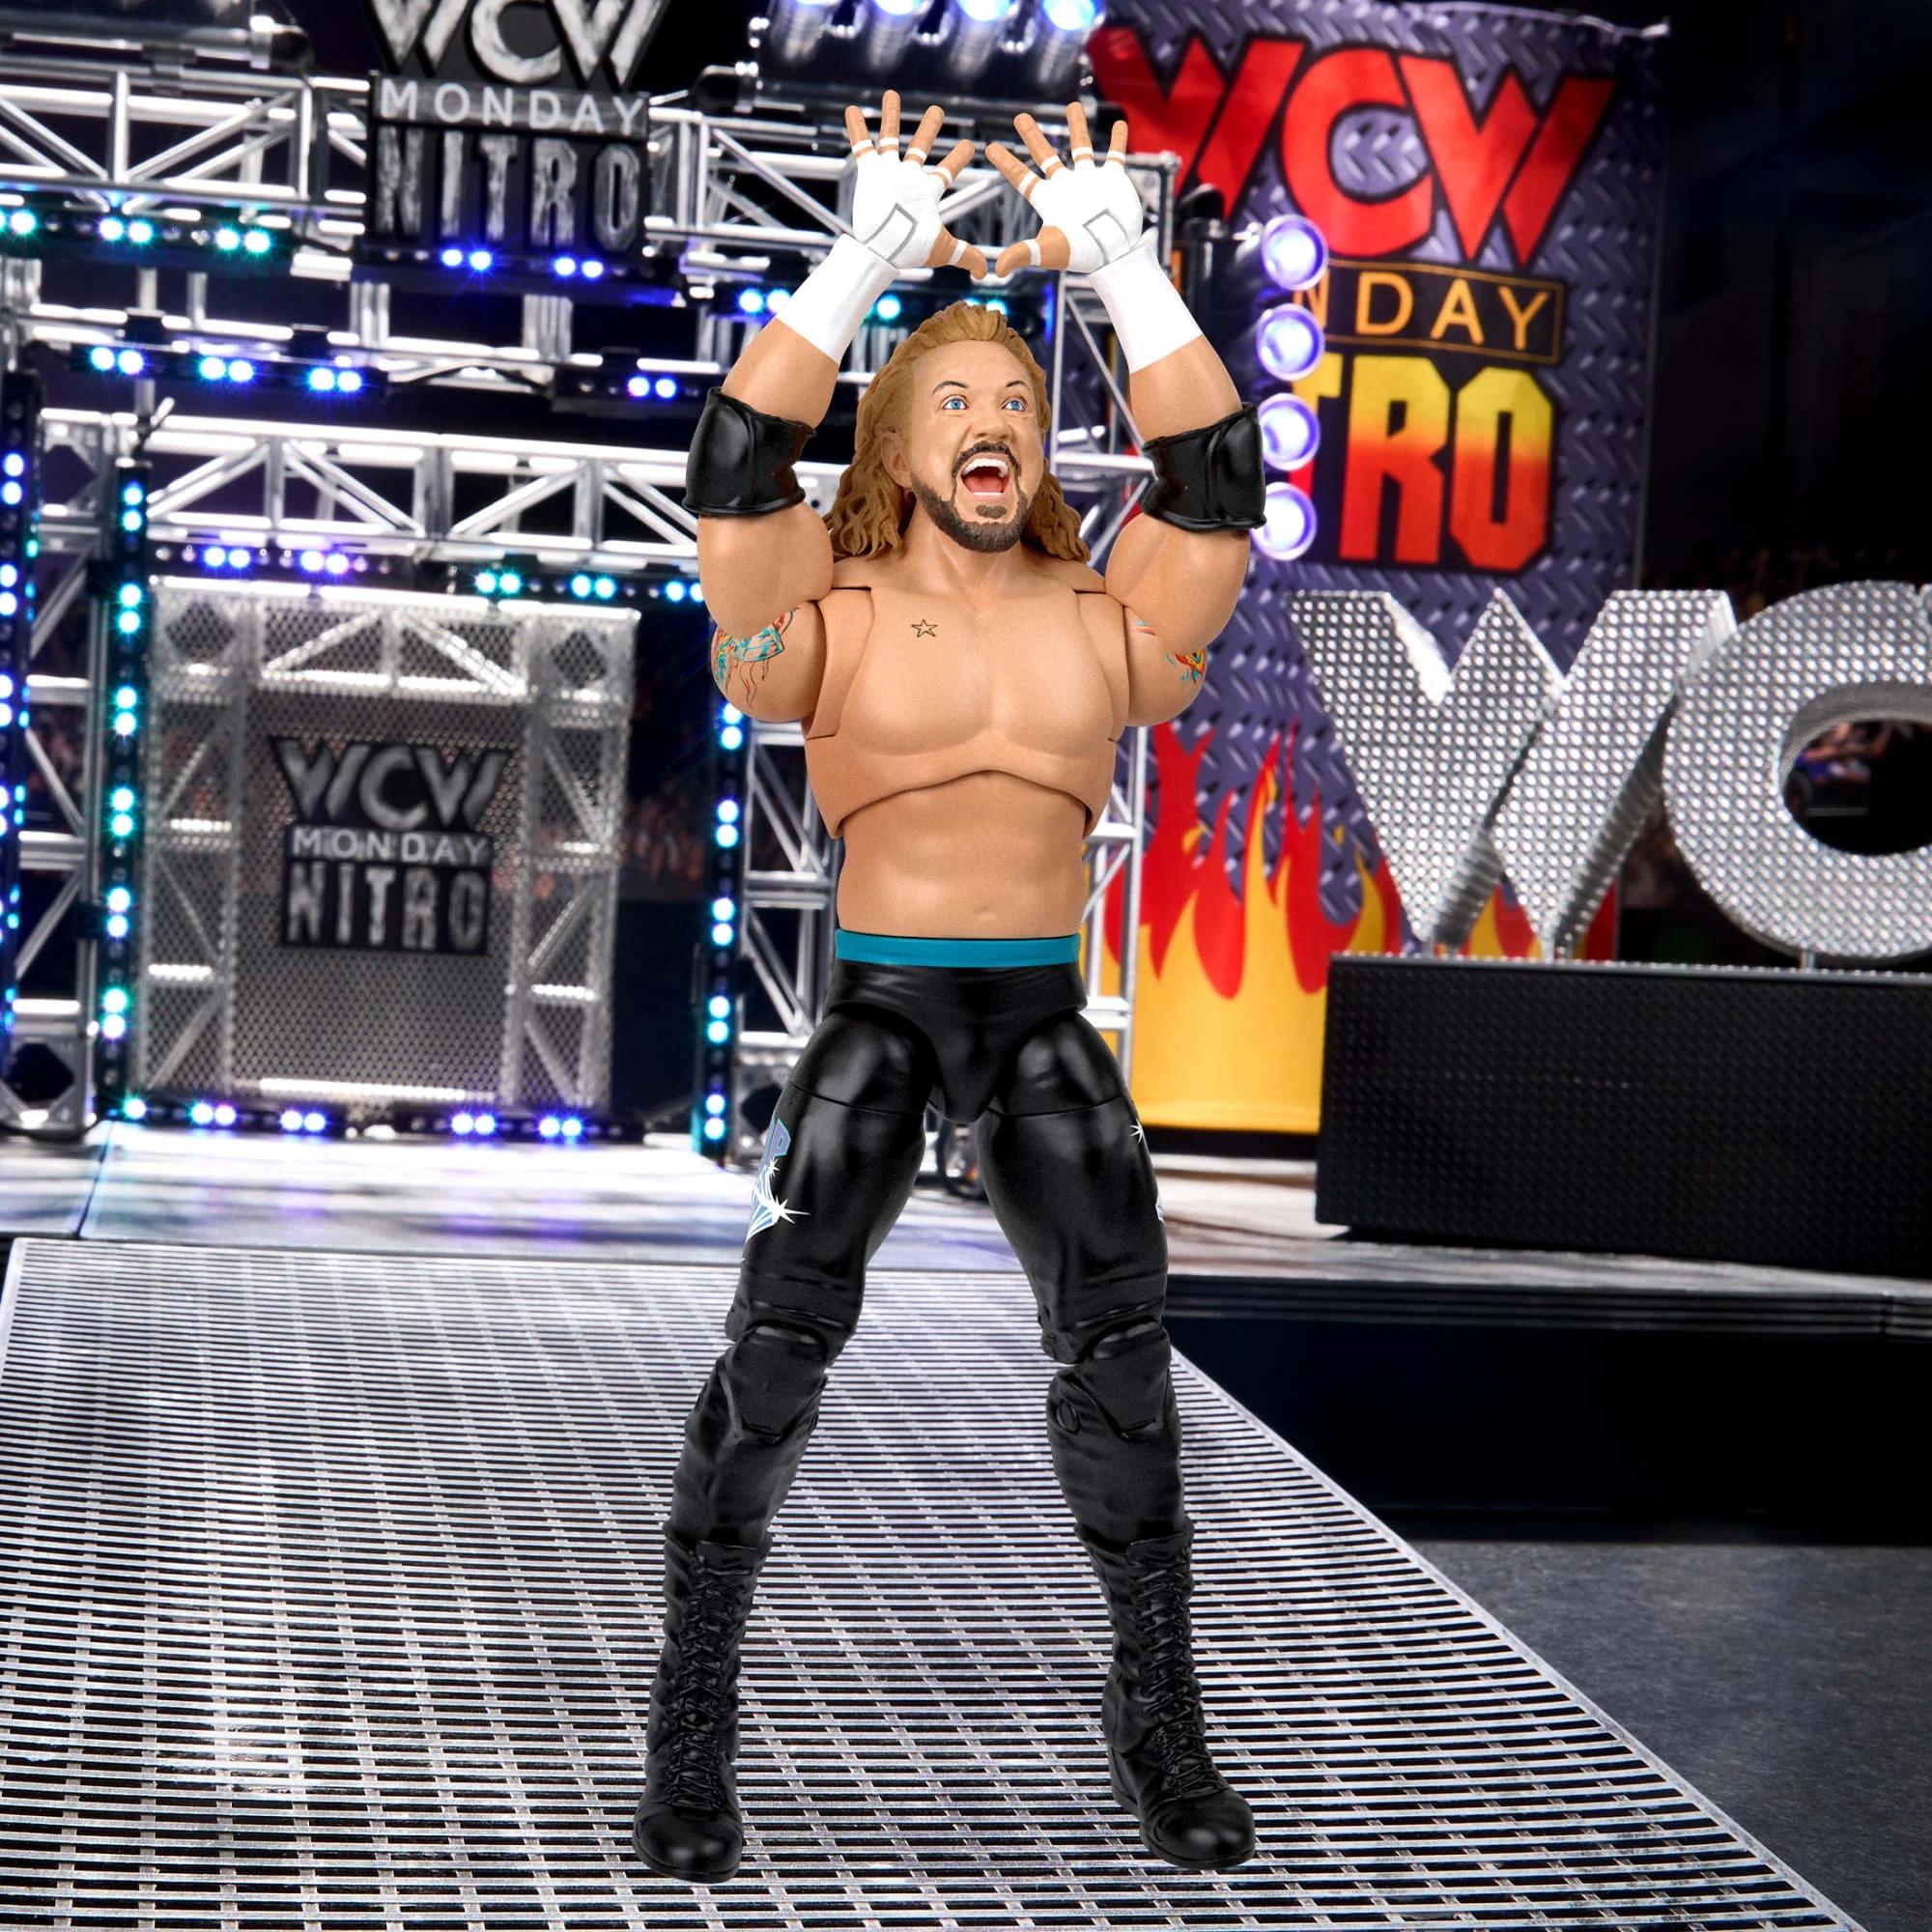 Mattel's WCW Monday Nitro Entrance Stage is almost a reality